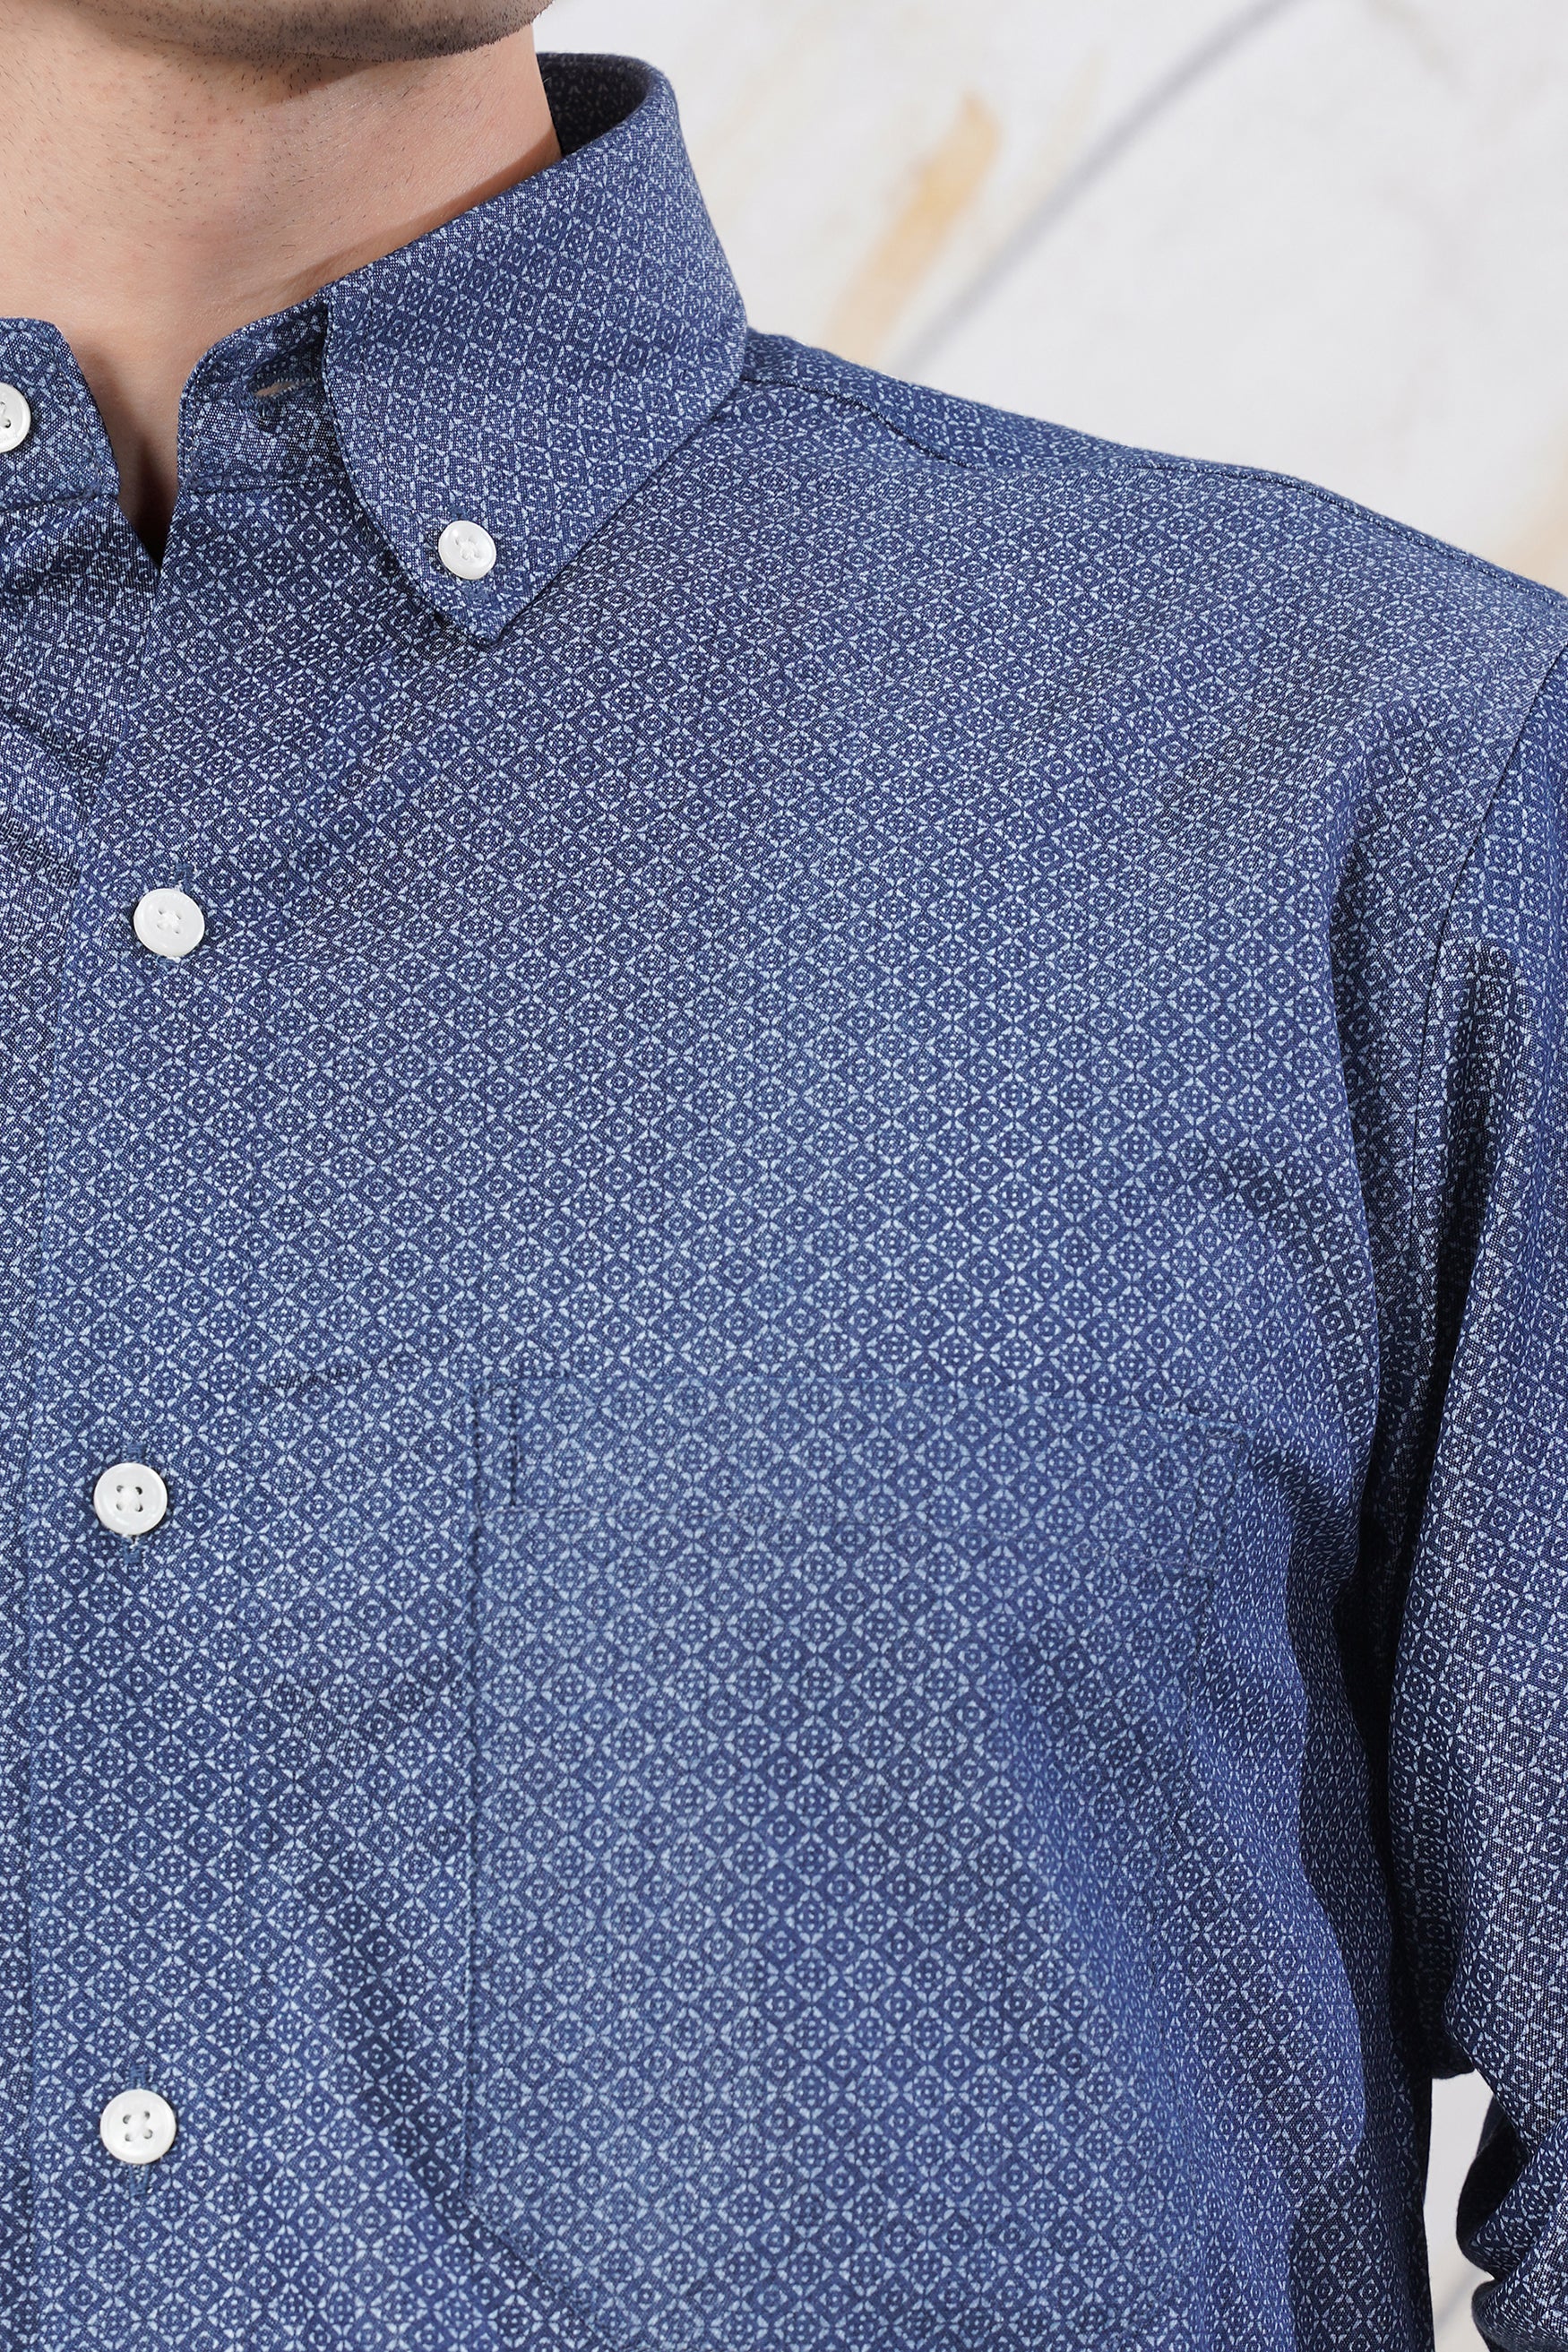 Cloud Burst Blue and Botticelli Blue Printed Chambray Shirt